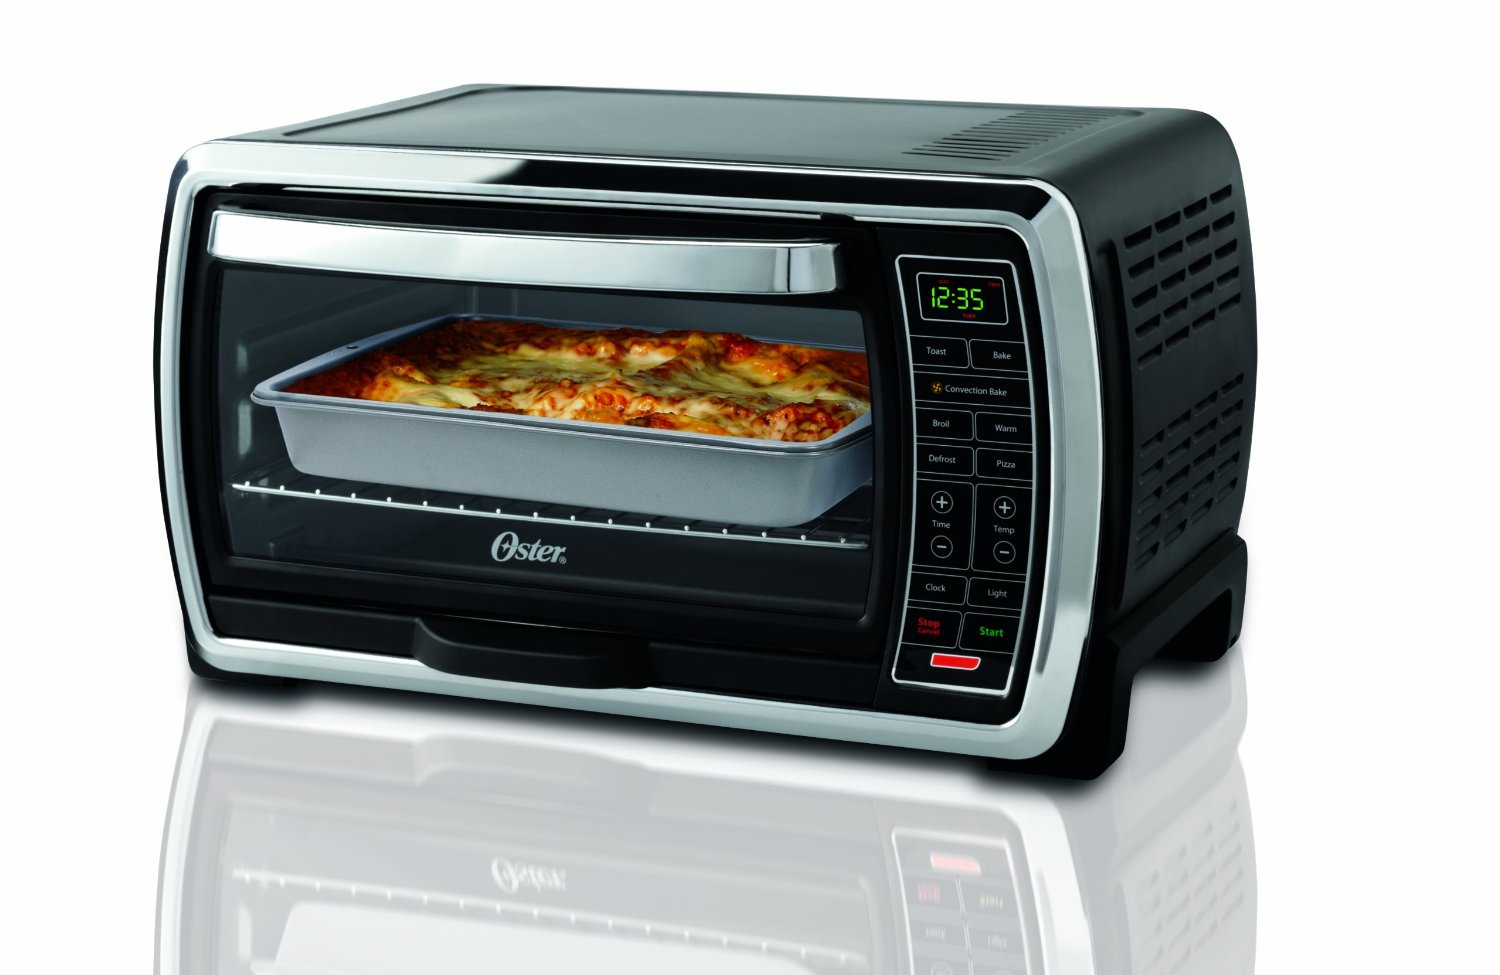 Oster TSSTTVMNDG Digital Large Capacity Toaster Oven, Black/Polished Stainless Accents  $59.99